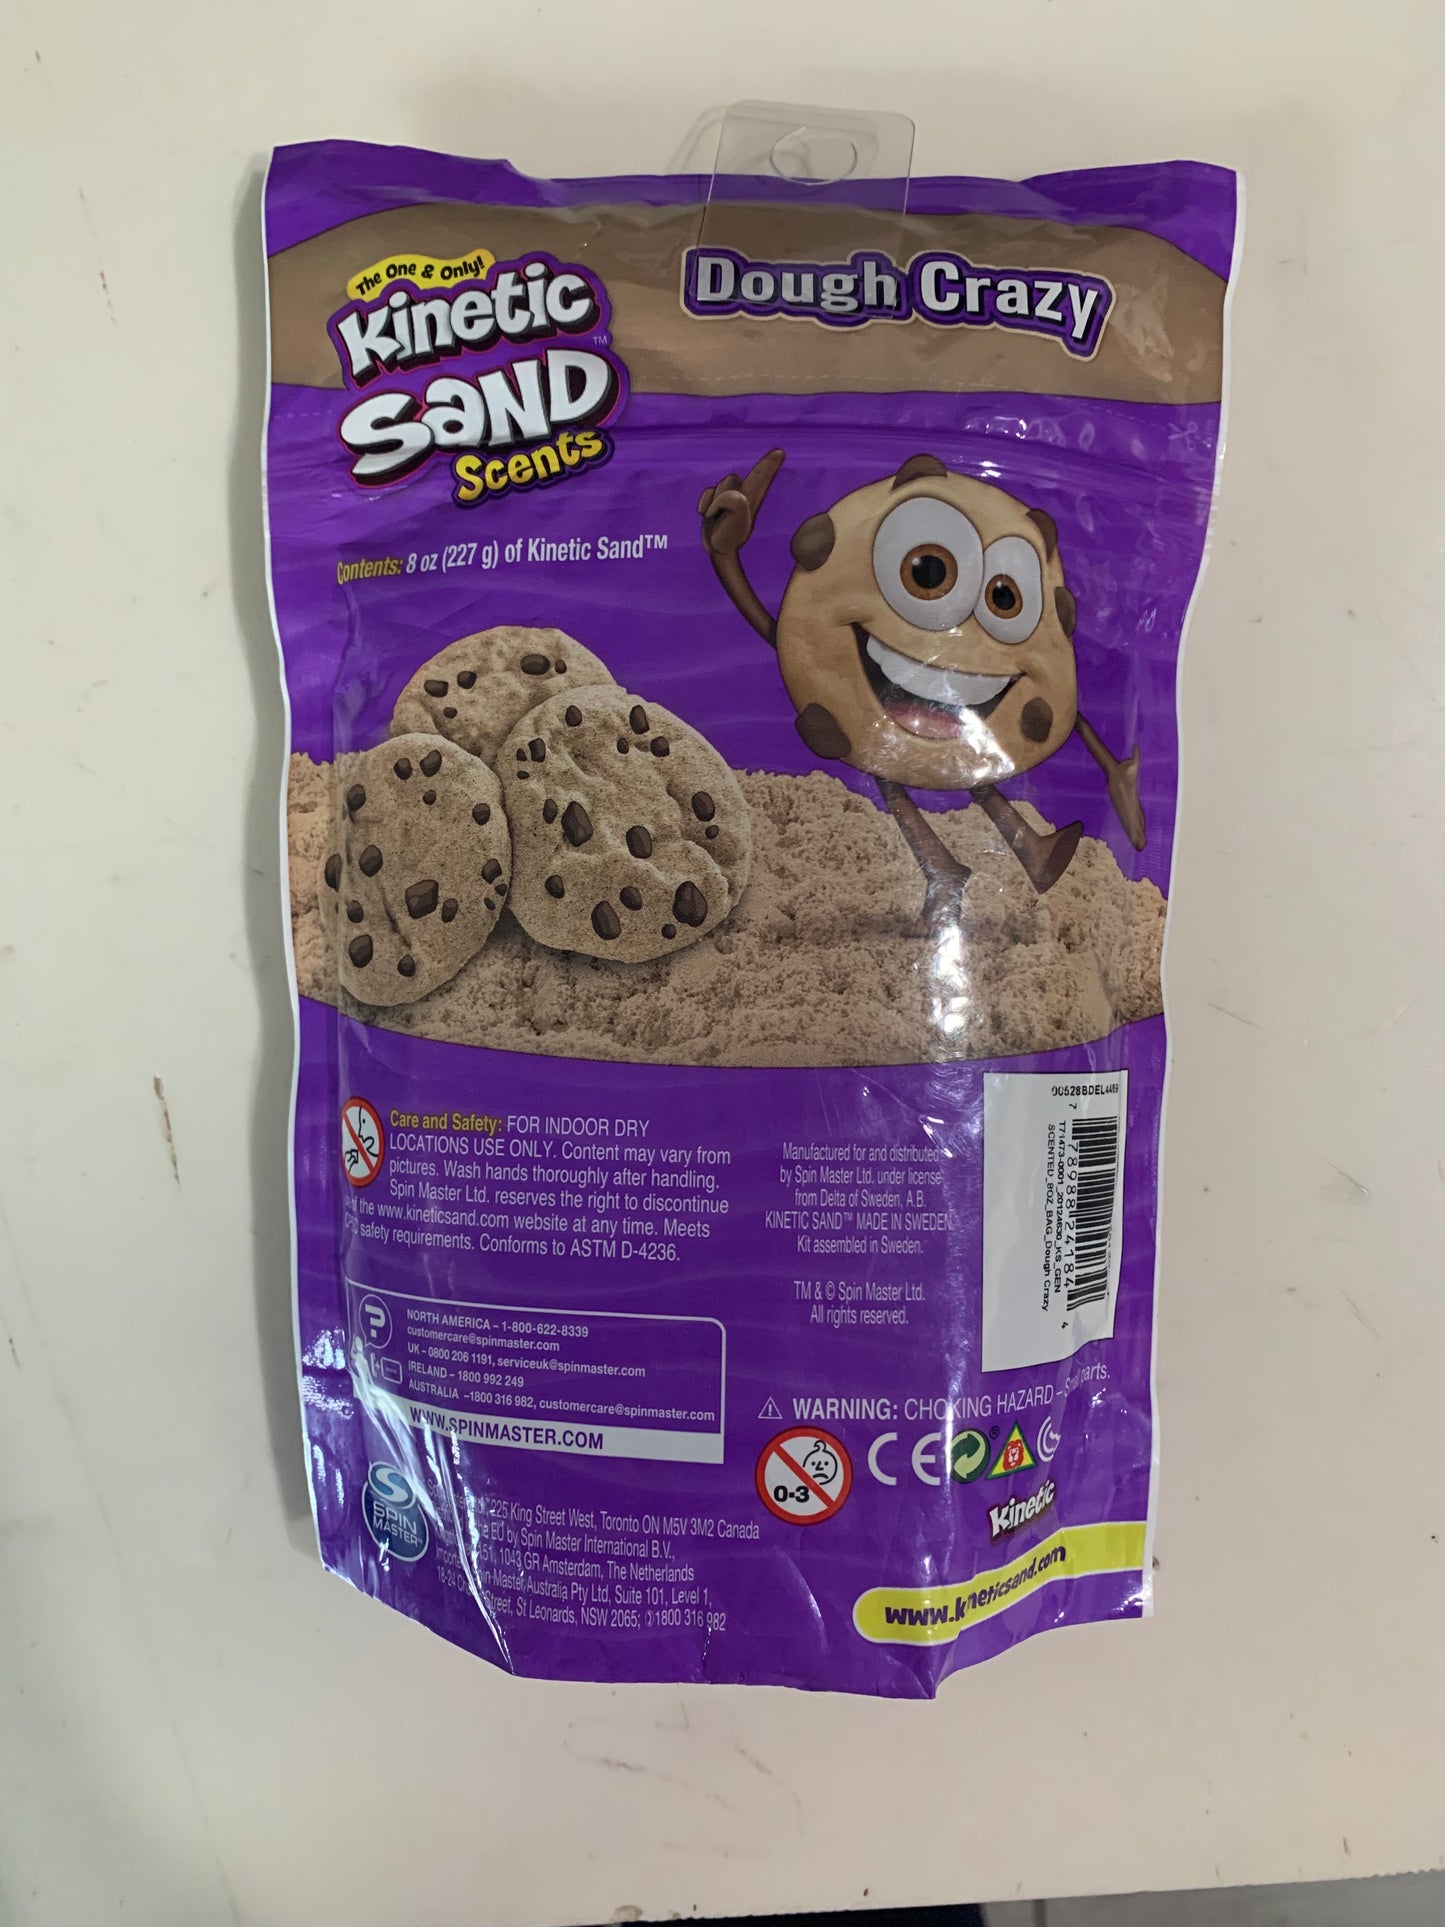 Kinetic Sand Scents, 8oz Light Brown Dough Crazy Scented Kinetic Sand